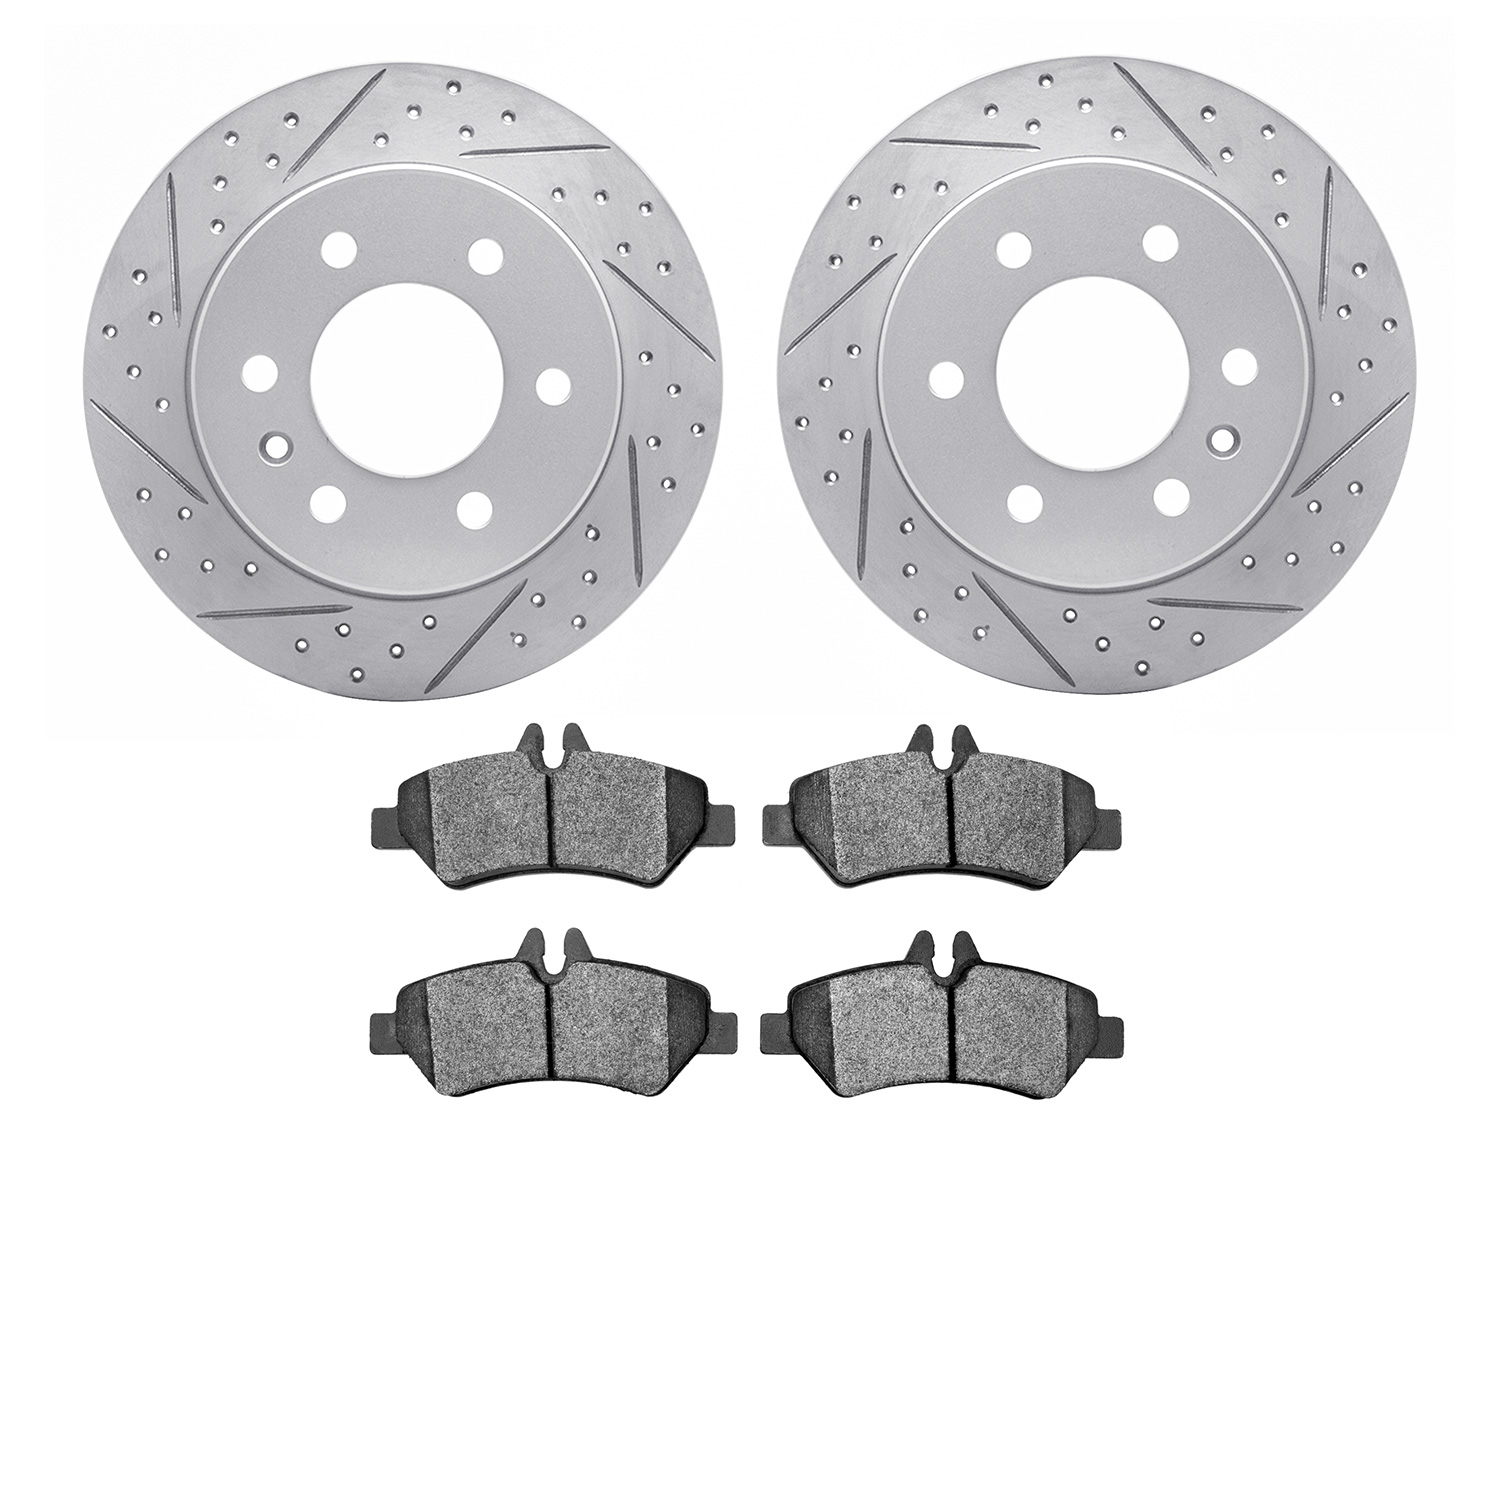 2502-40025 Geoperformance Drilled/Slotted Rotors w/5000 Advanced Brake Pads Kit, 2007-2018 Multiple Makes/Models, Position: Rear